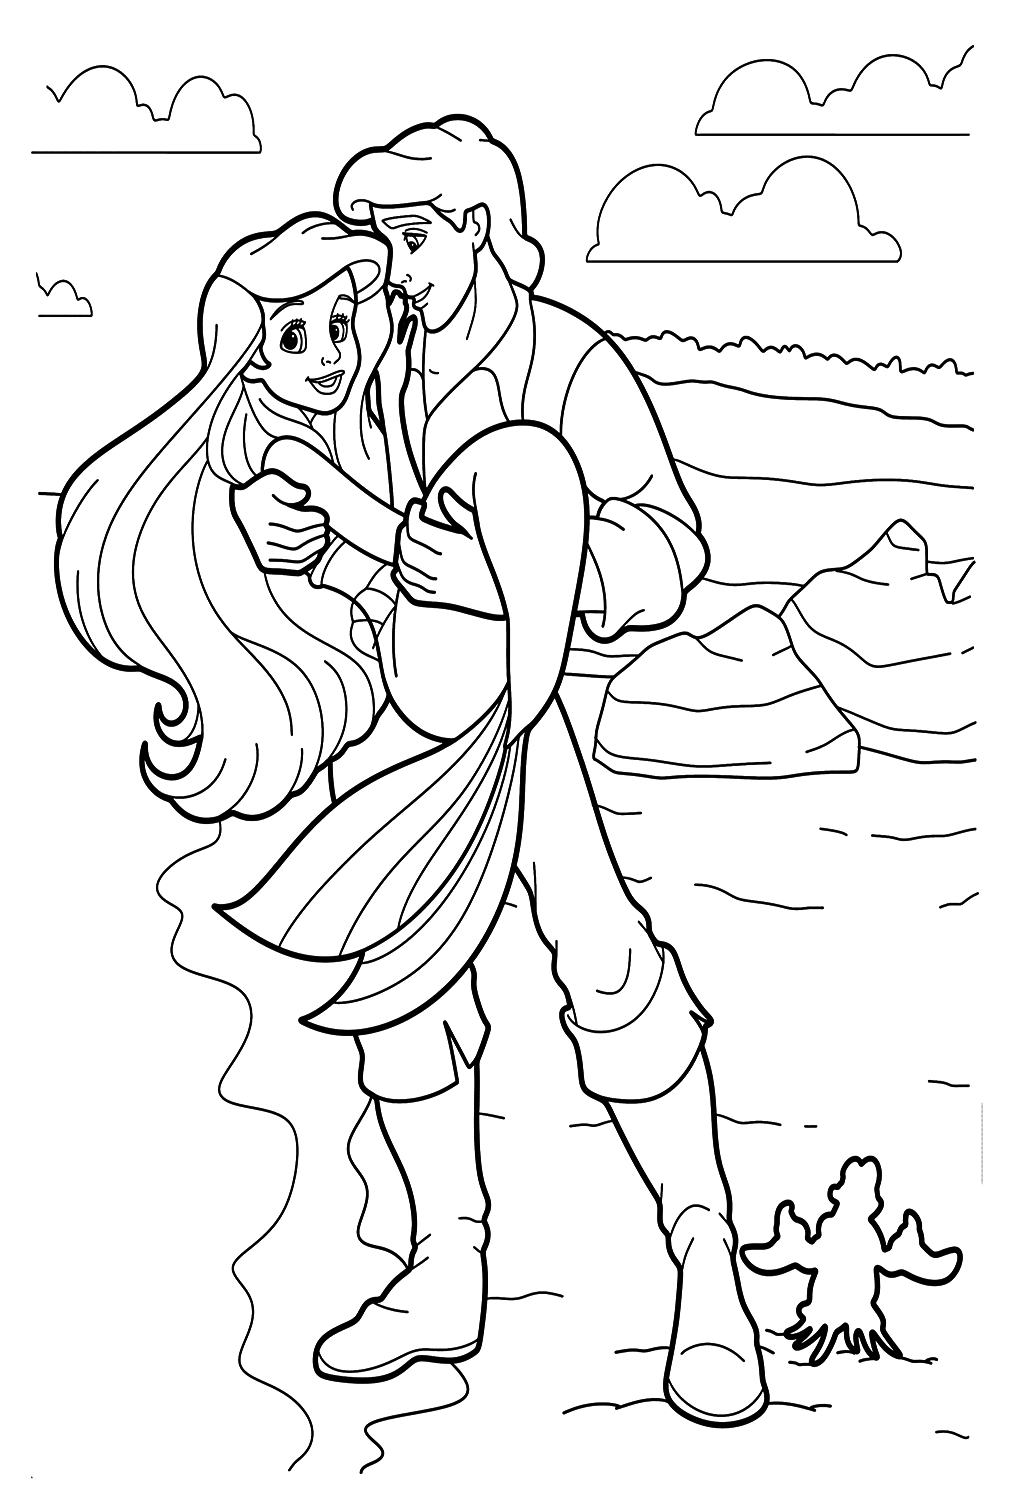 The Little Mermaid Coloring Pages - Free Printable Coloring Pages